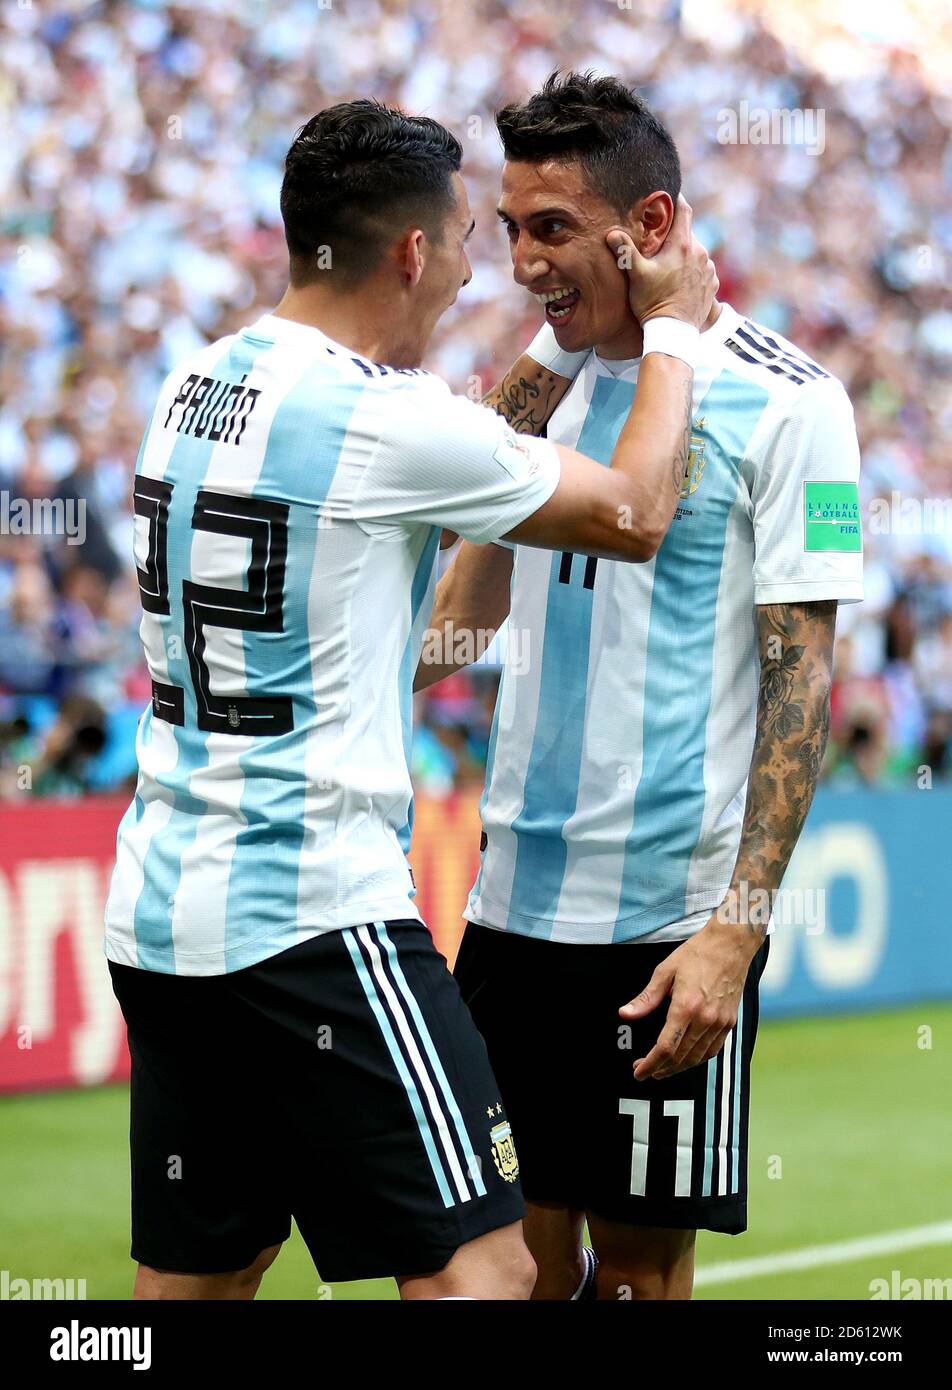 Argentina's Angel Di Maria (right) celebrates scoring his side's first goal of the game with team-mate Argentina's Cristian Pavon (left) Stock Photo